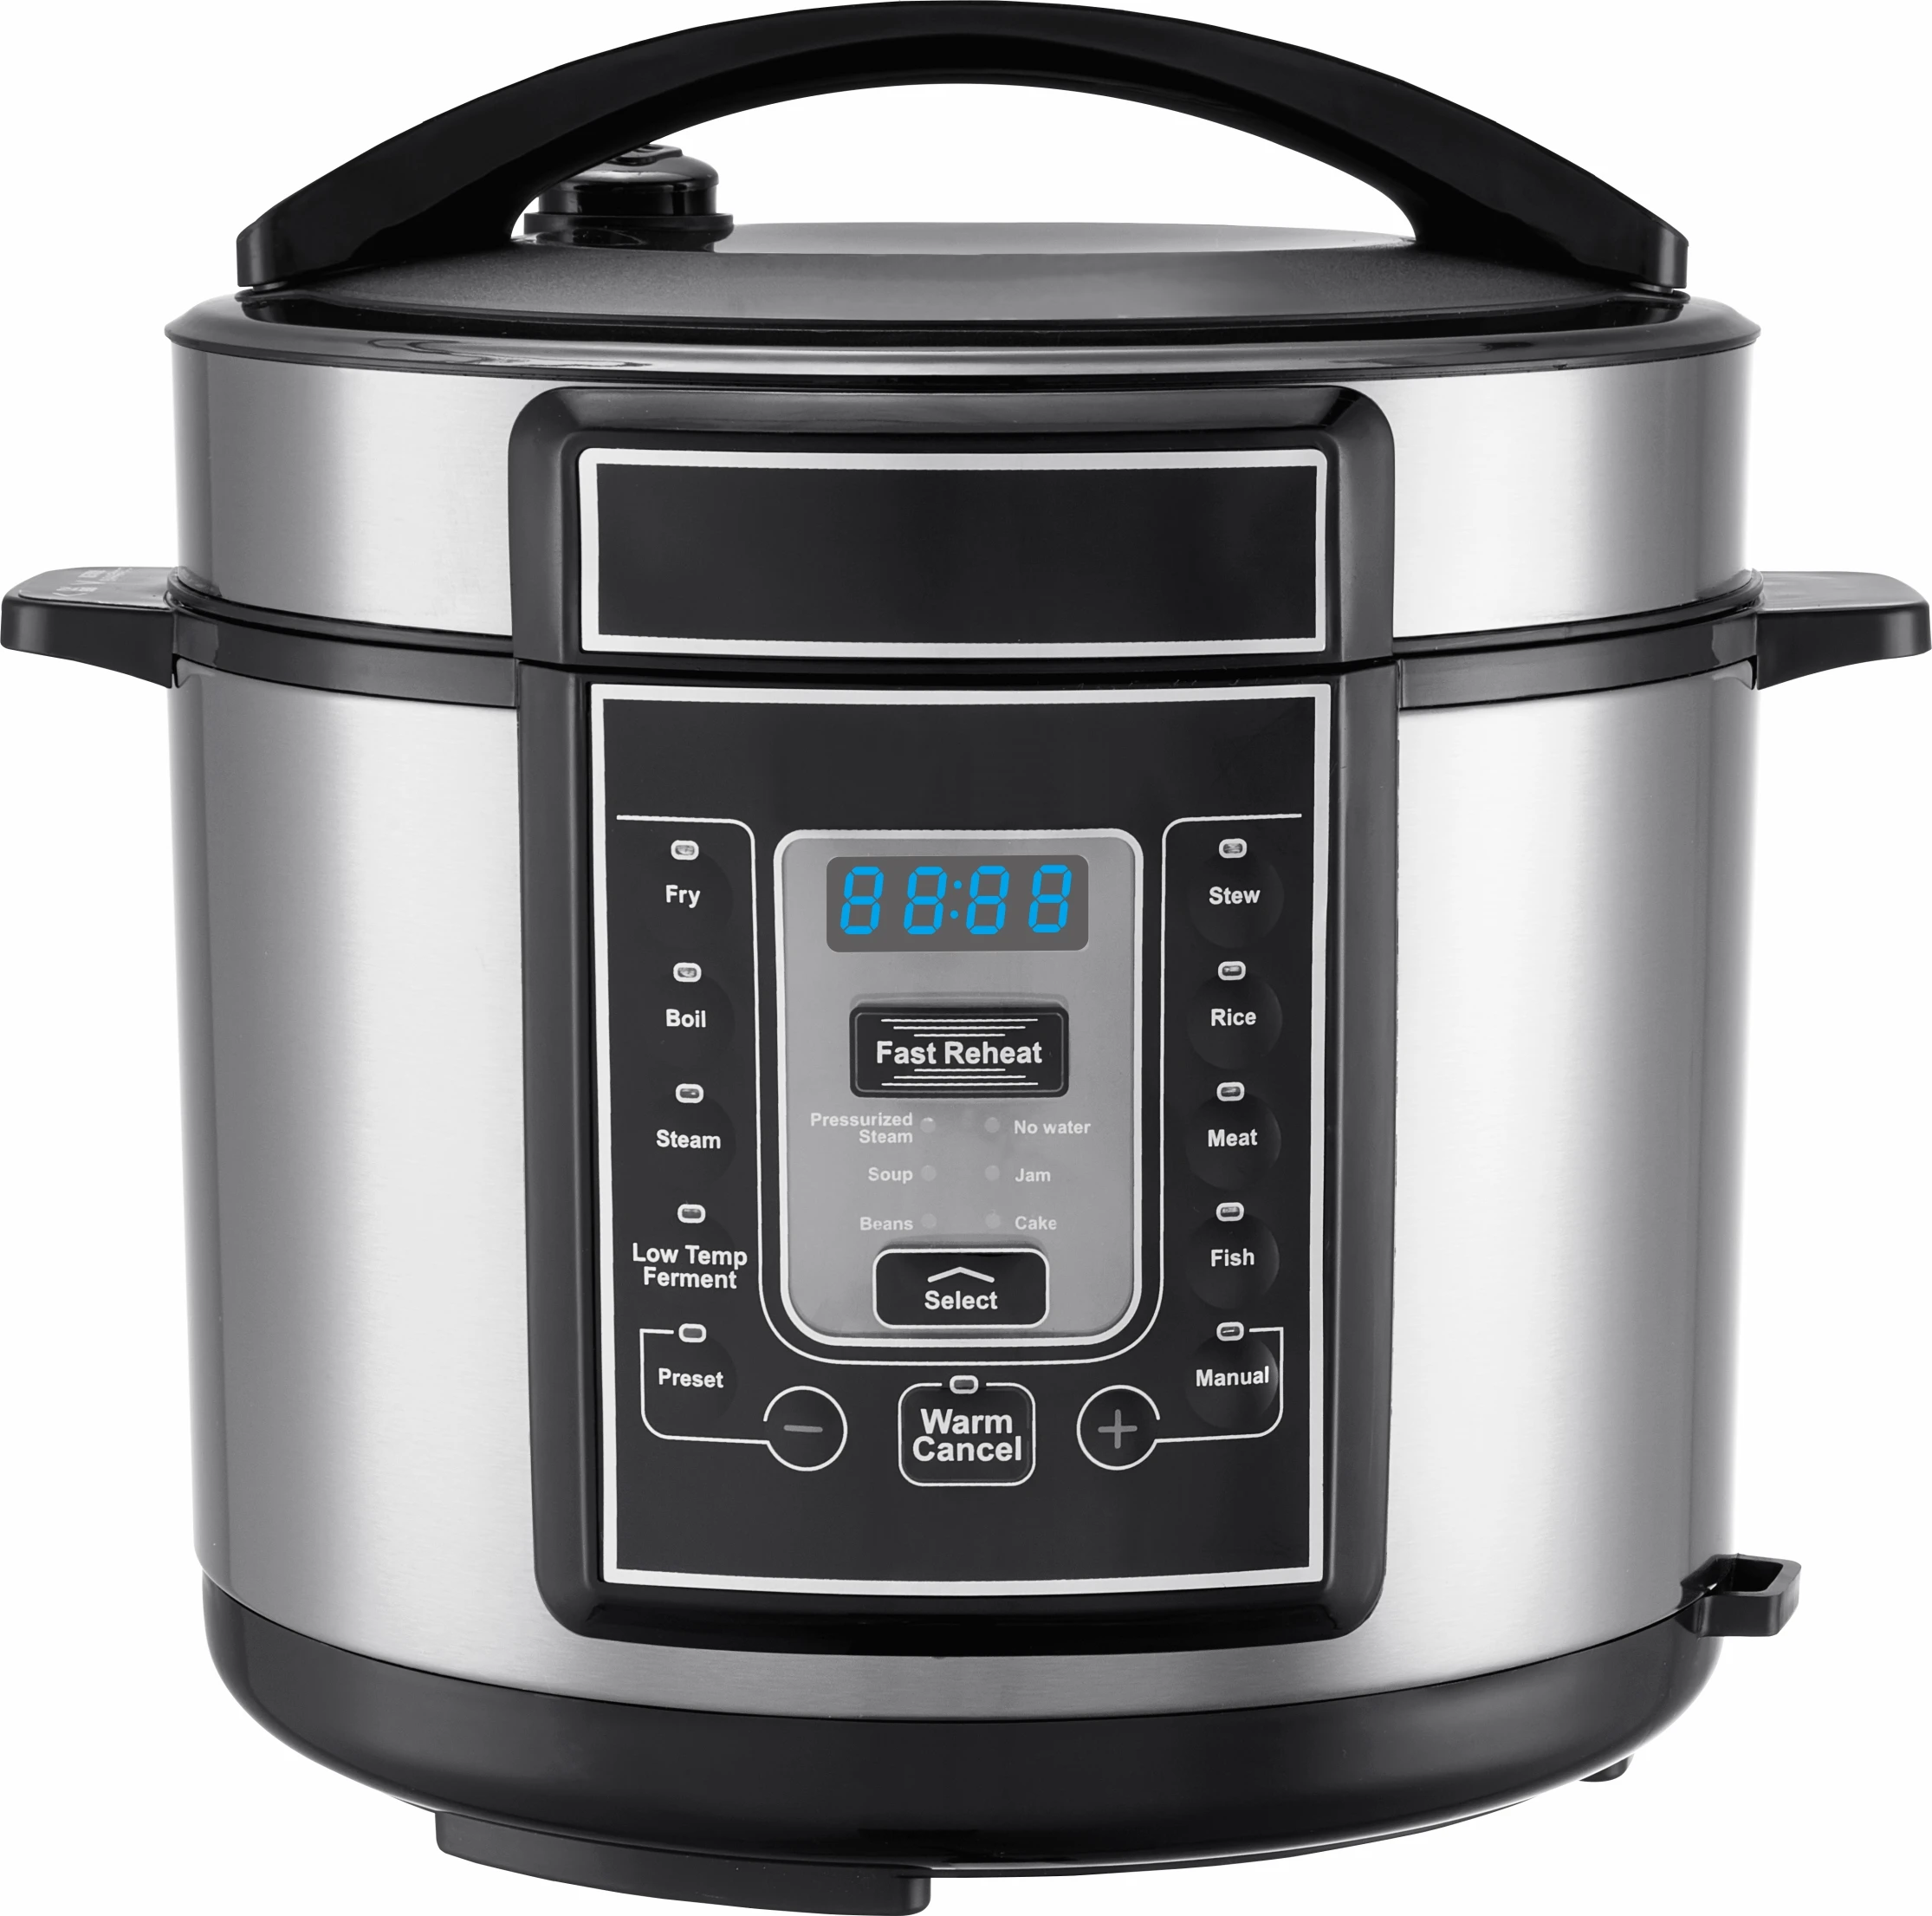 Buy Wholesale China Eap 6 Quart Professional Collection Stainless Steel  Pressure Cooker & Stainless Steel Pressure Cooker at USD 5